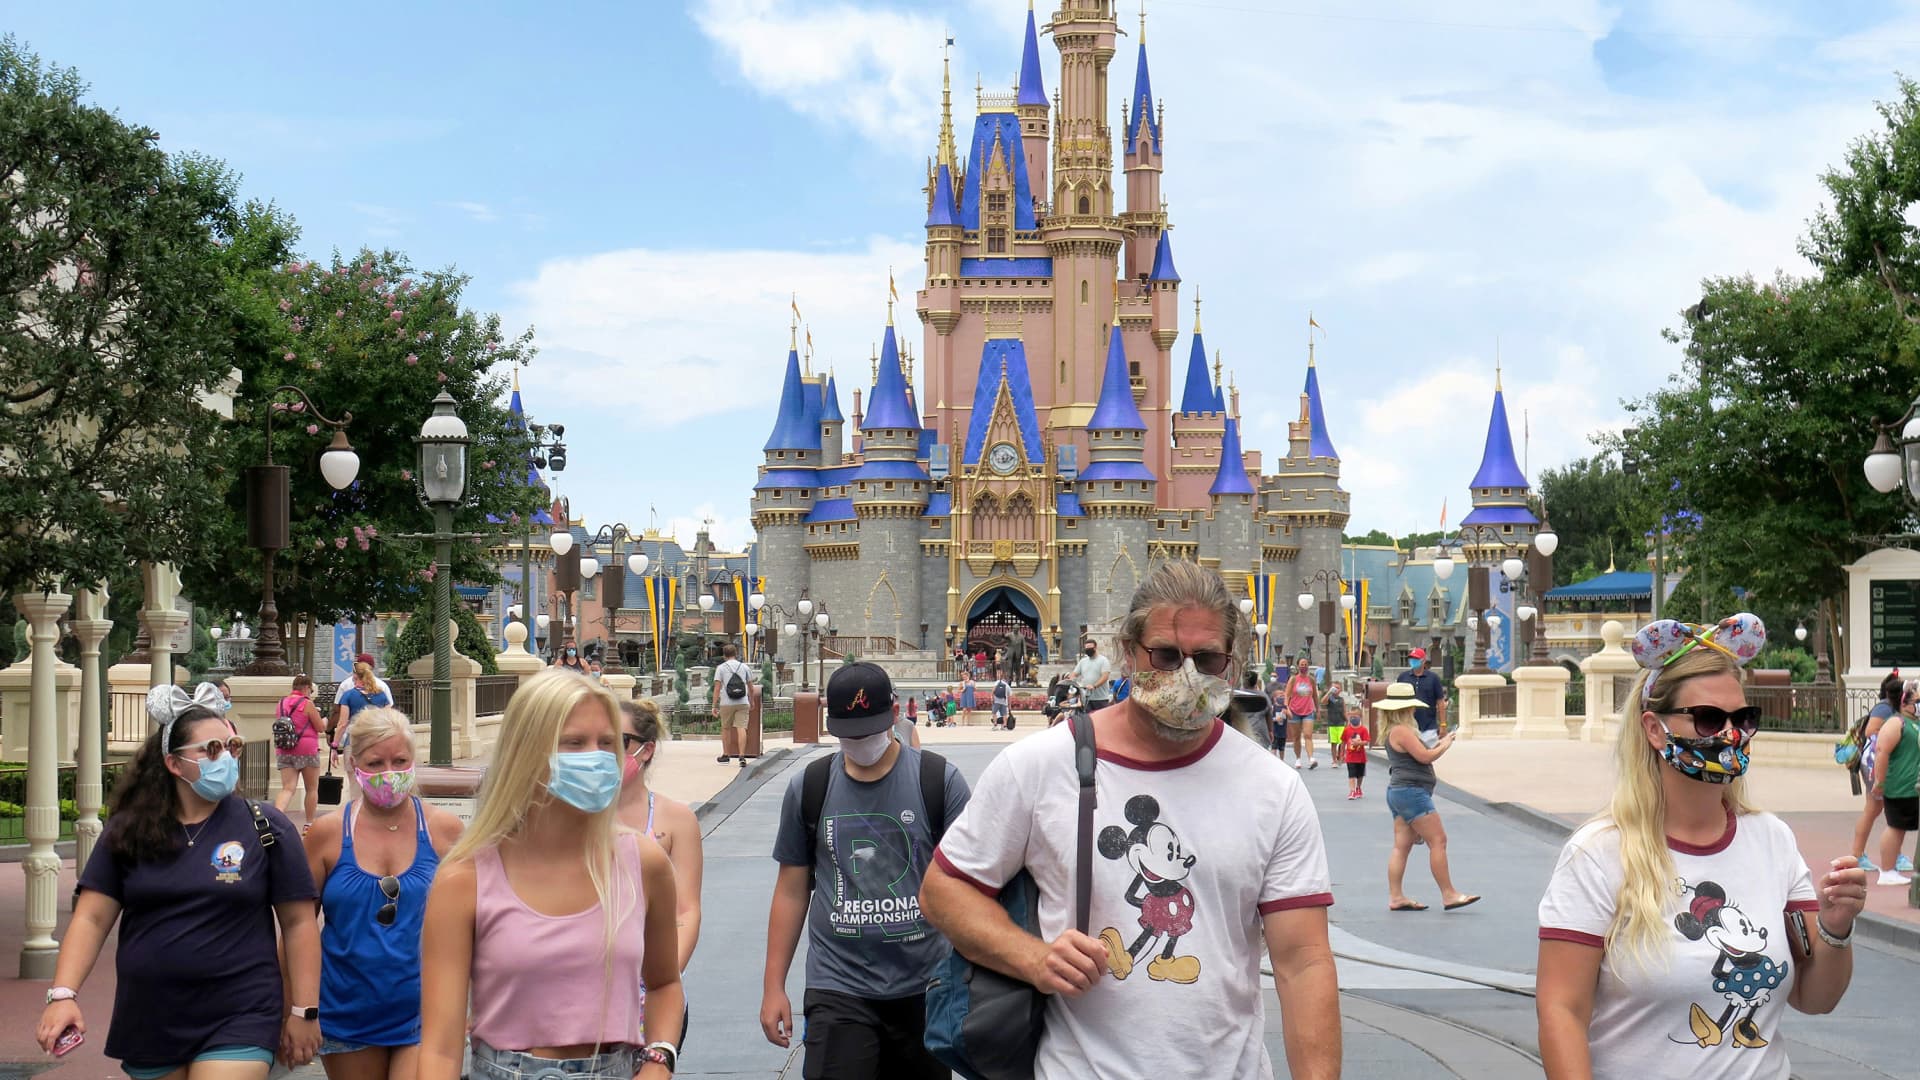 Guests wear masks. as required. to attend the official re-opening day of the Magic Kingdom at Walt Disney World in Lake Buena Vista, Florida, on Saturday, July 11, 2020.